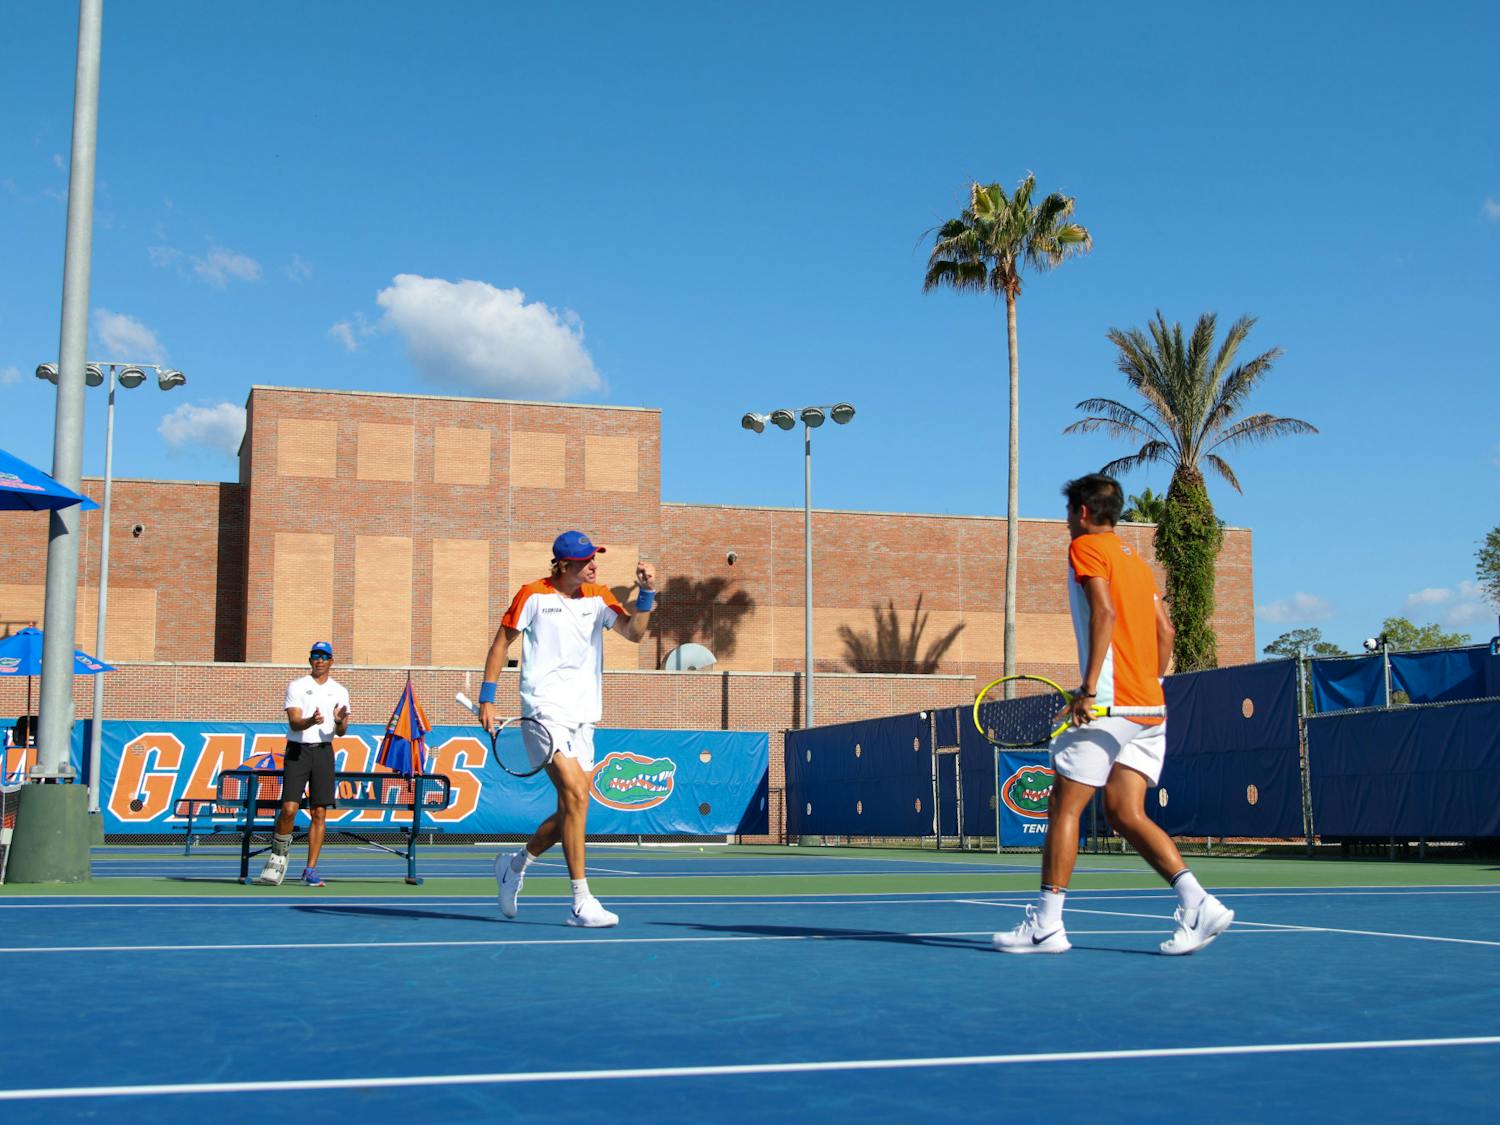 Florida sophomore Nate Bonetto and freshman Tanapatt Nirundorn compete in their doubles match during the Gators' men's tennis match game against the Arkansas Razorbacks Friday, March 24, 2023.